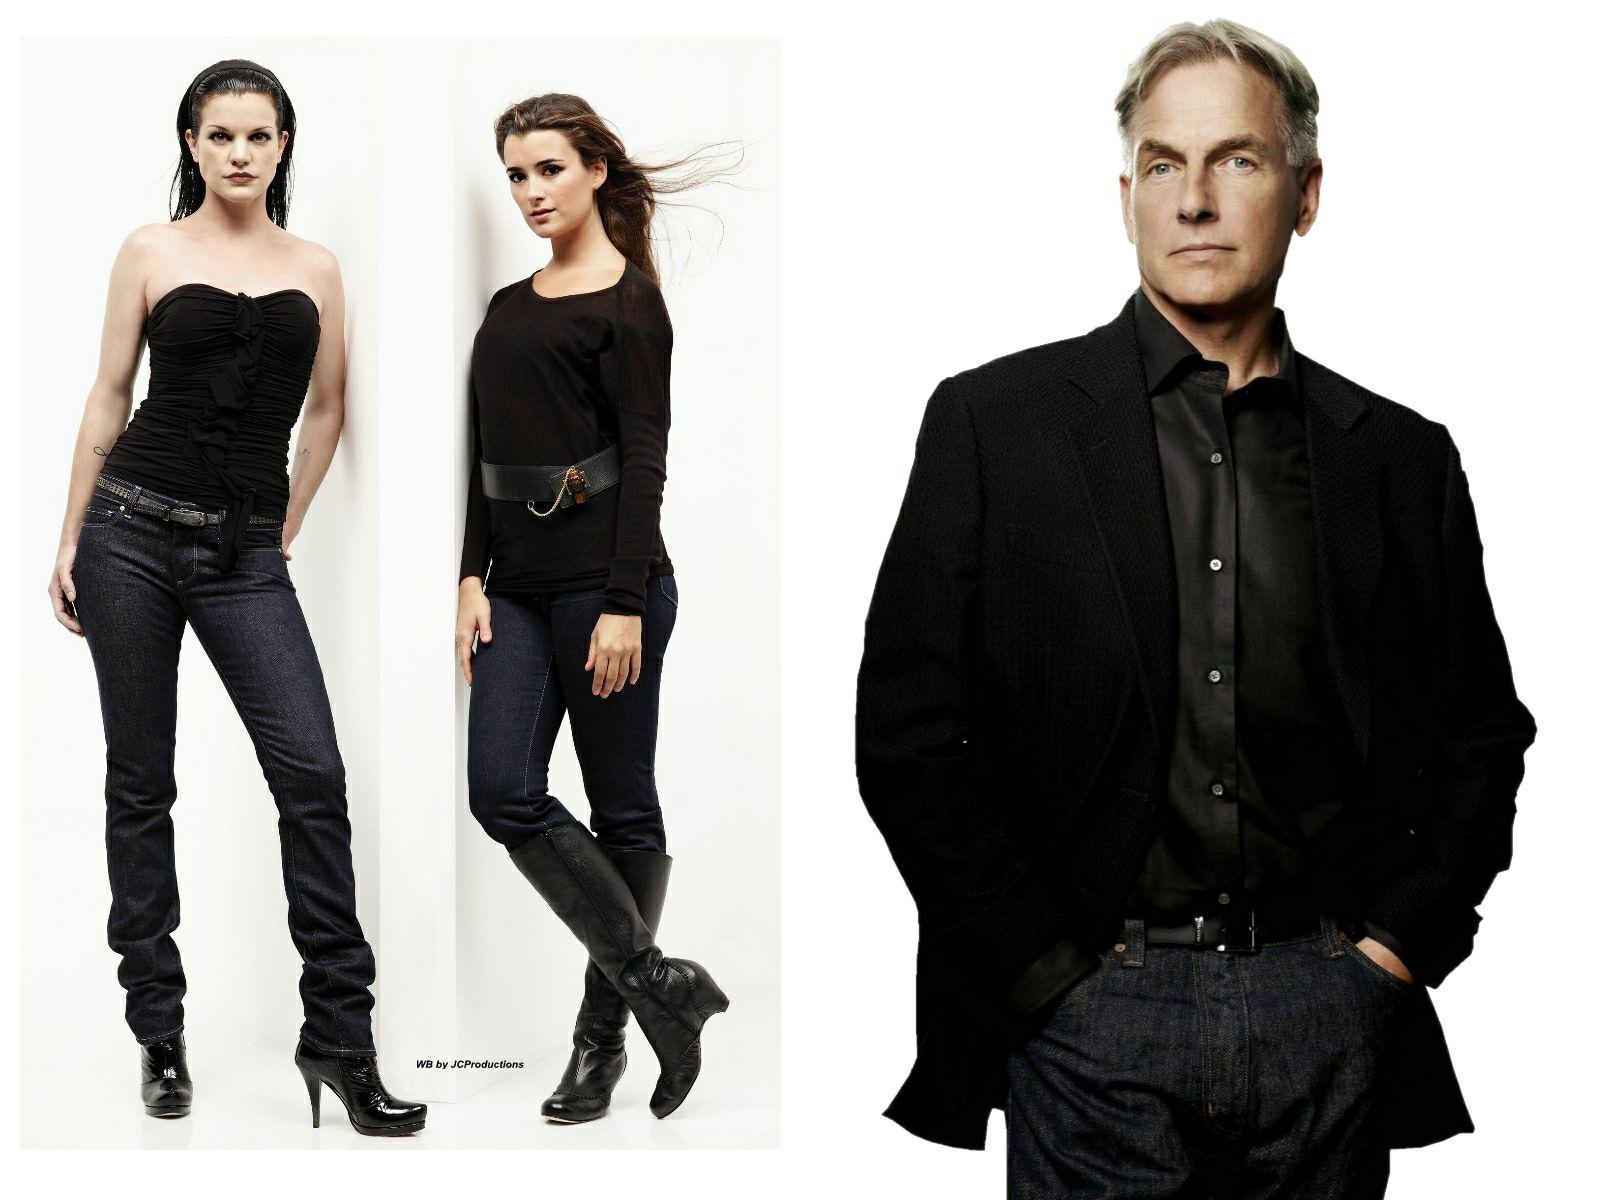 Women of NCIS image Abby & Ziva HD wallpaper and background